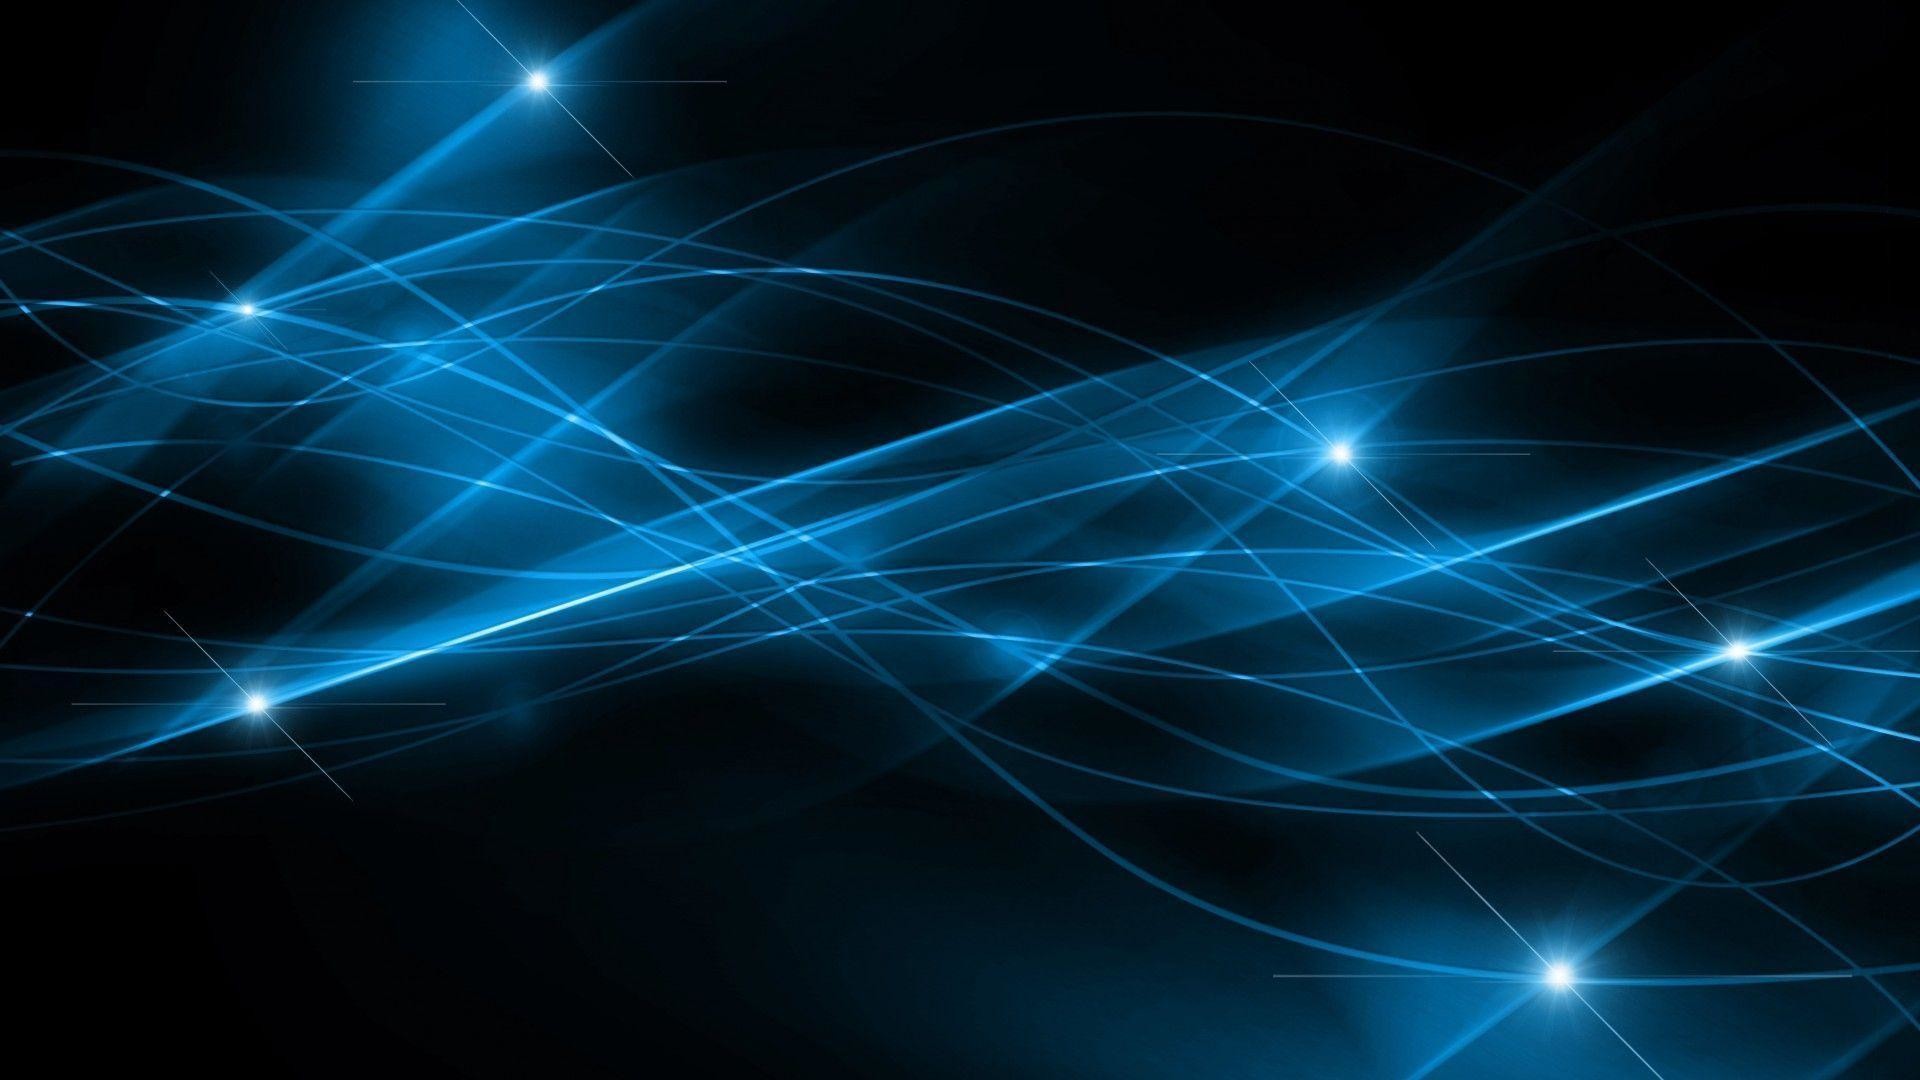 1920x1080 Black And Blue Abstract Backgrounds Hd Background 9 HD Wallpapers .